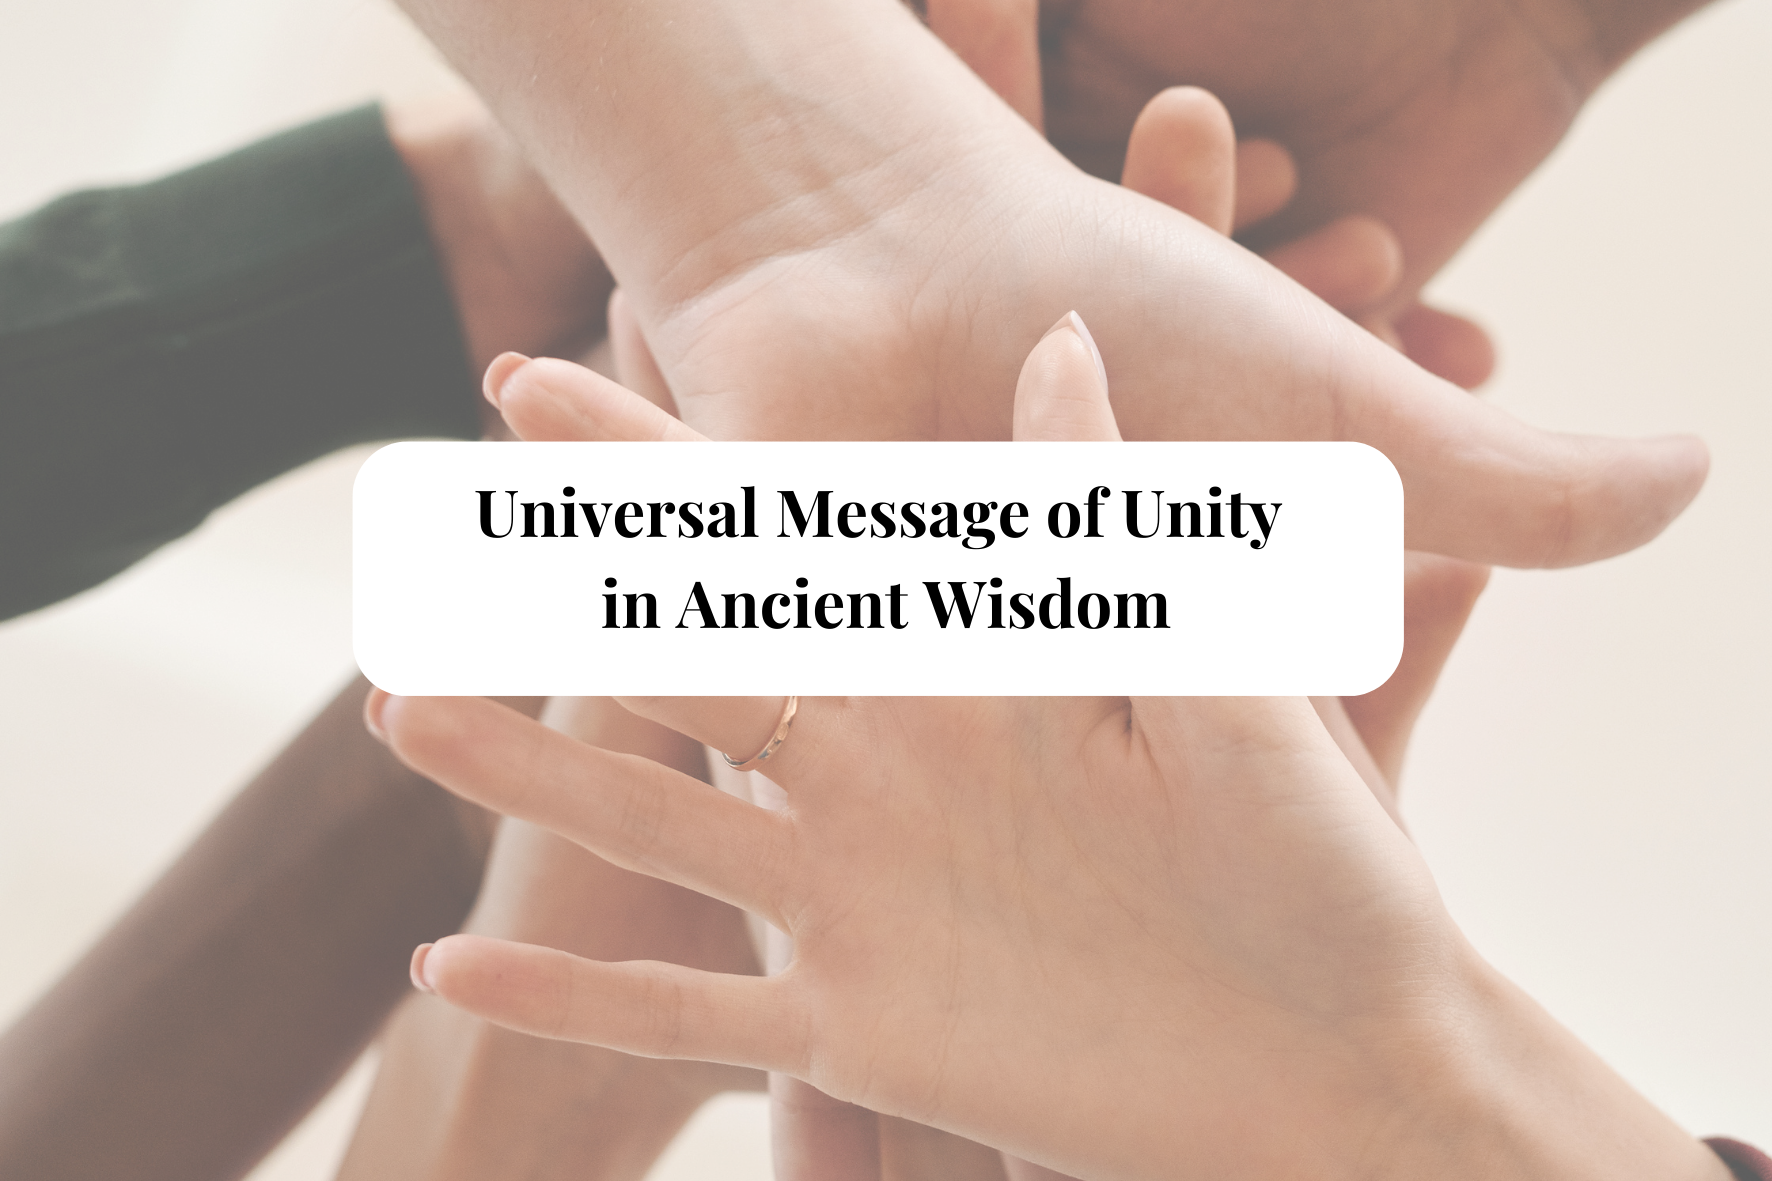 Parashat VaEtchanan<br>Beyond Borders: Unveiling the Universal Message of Unity in Ancient Wisdom